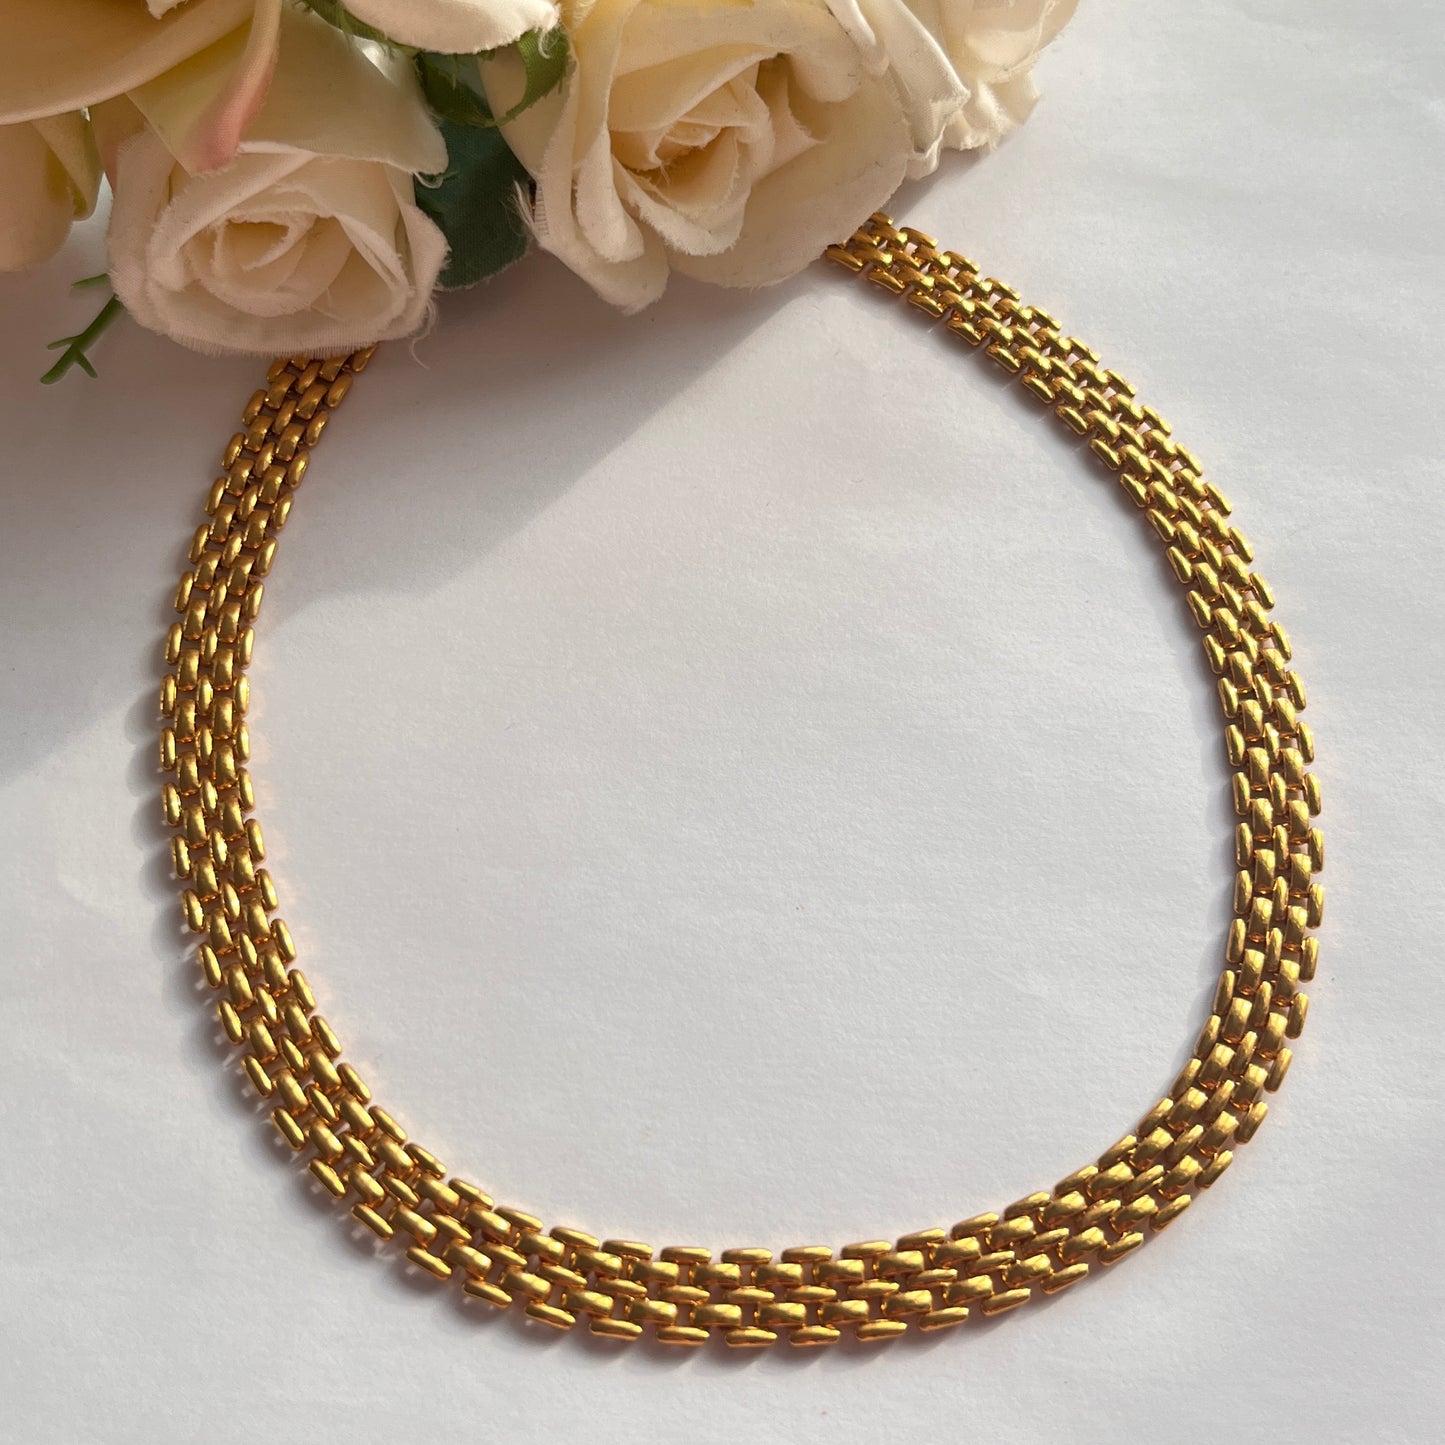 1980s Napier Gold Plated Statement Collar Necklace